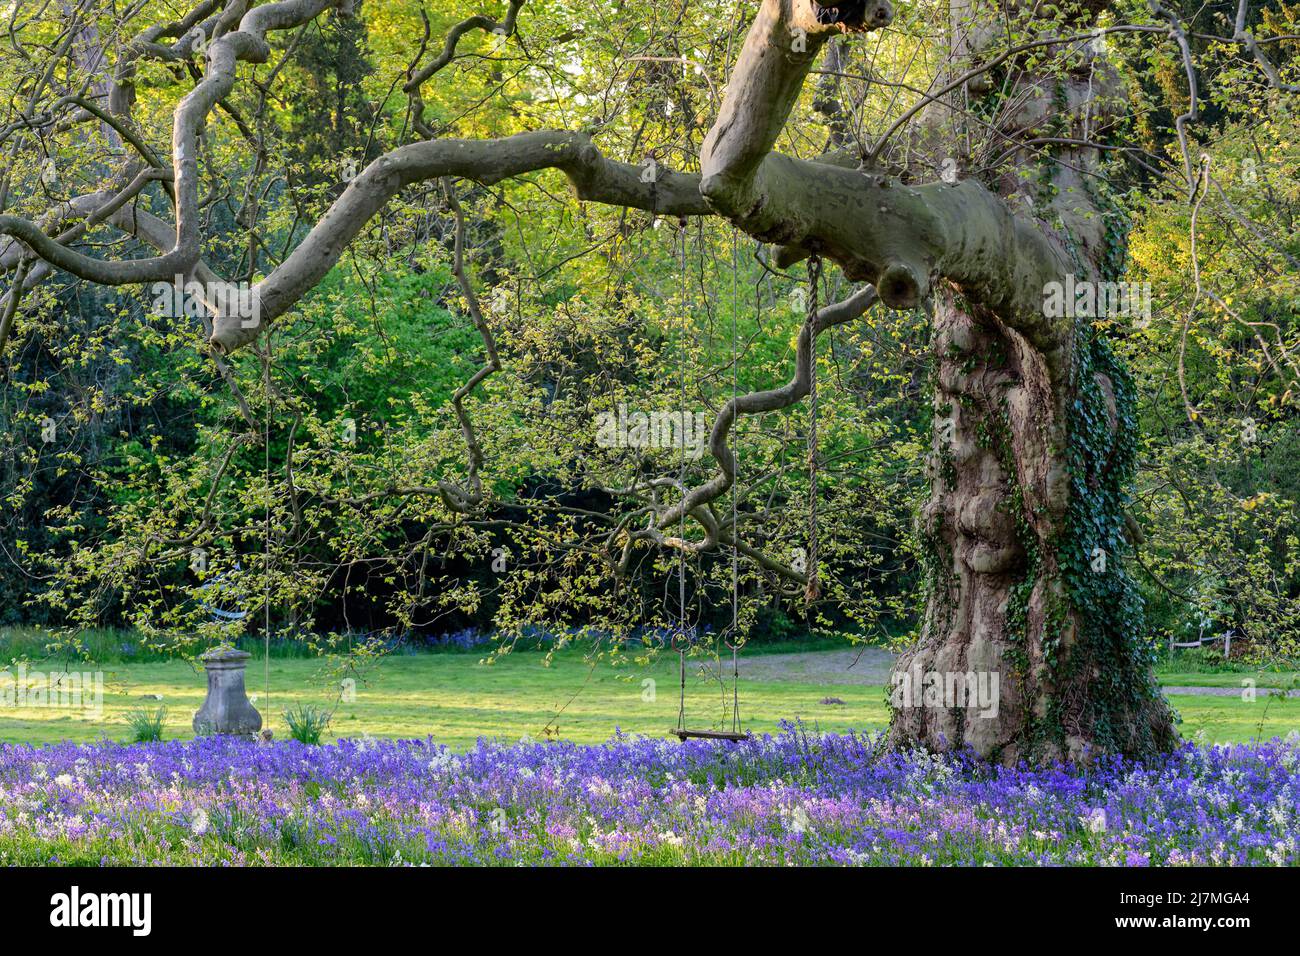 Big tree with a rope and a swing surrounded by bluebell flowers Stock Photo